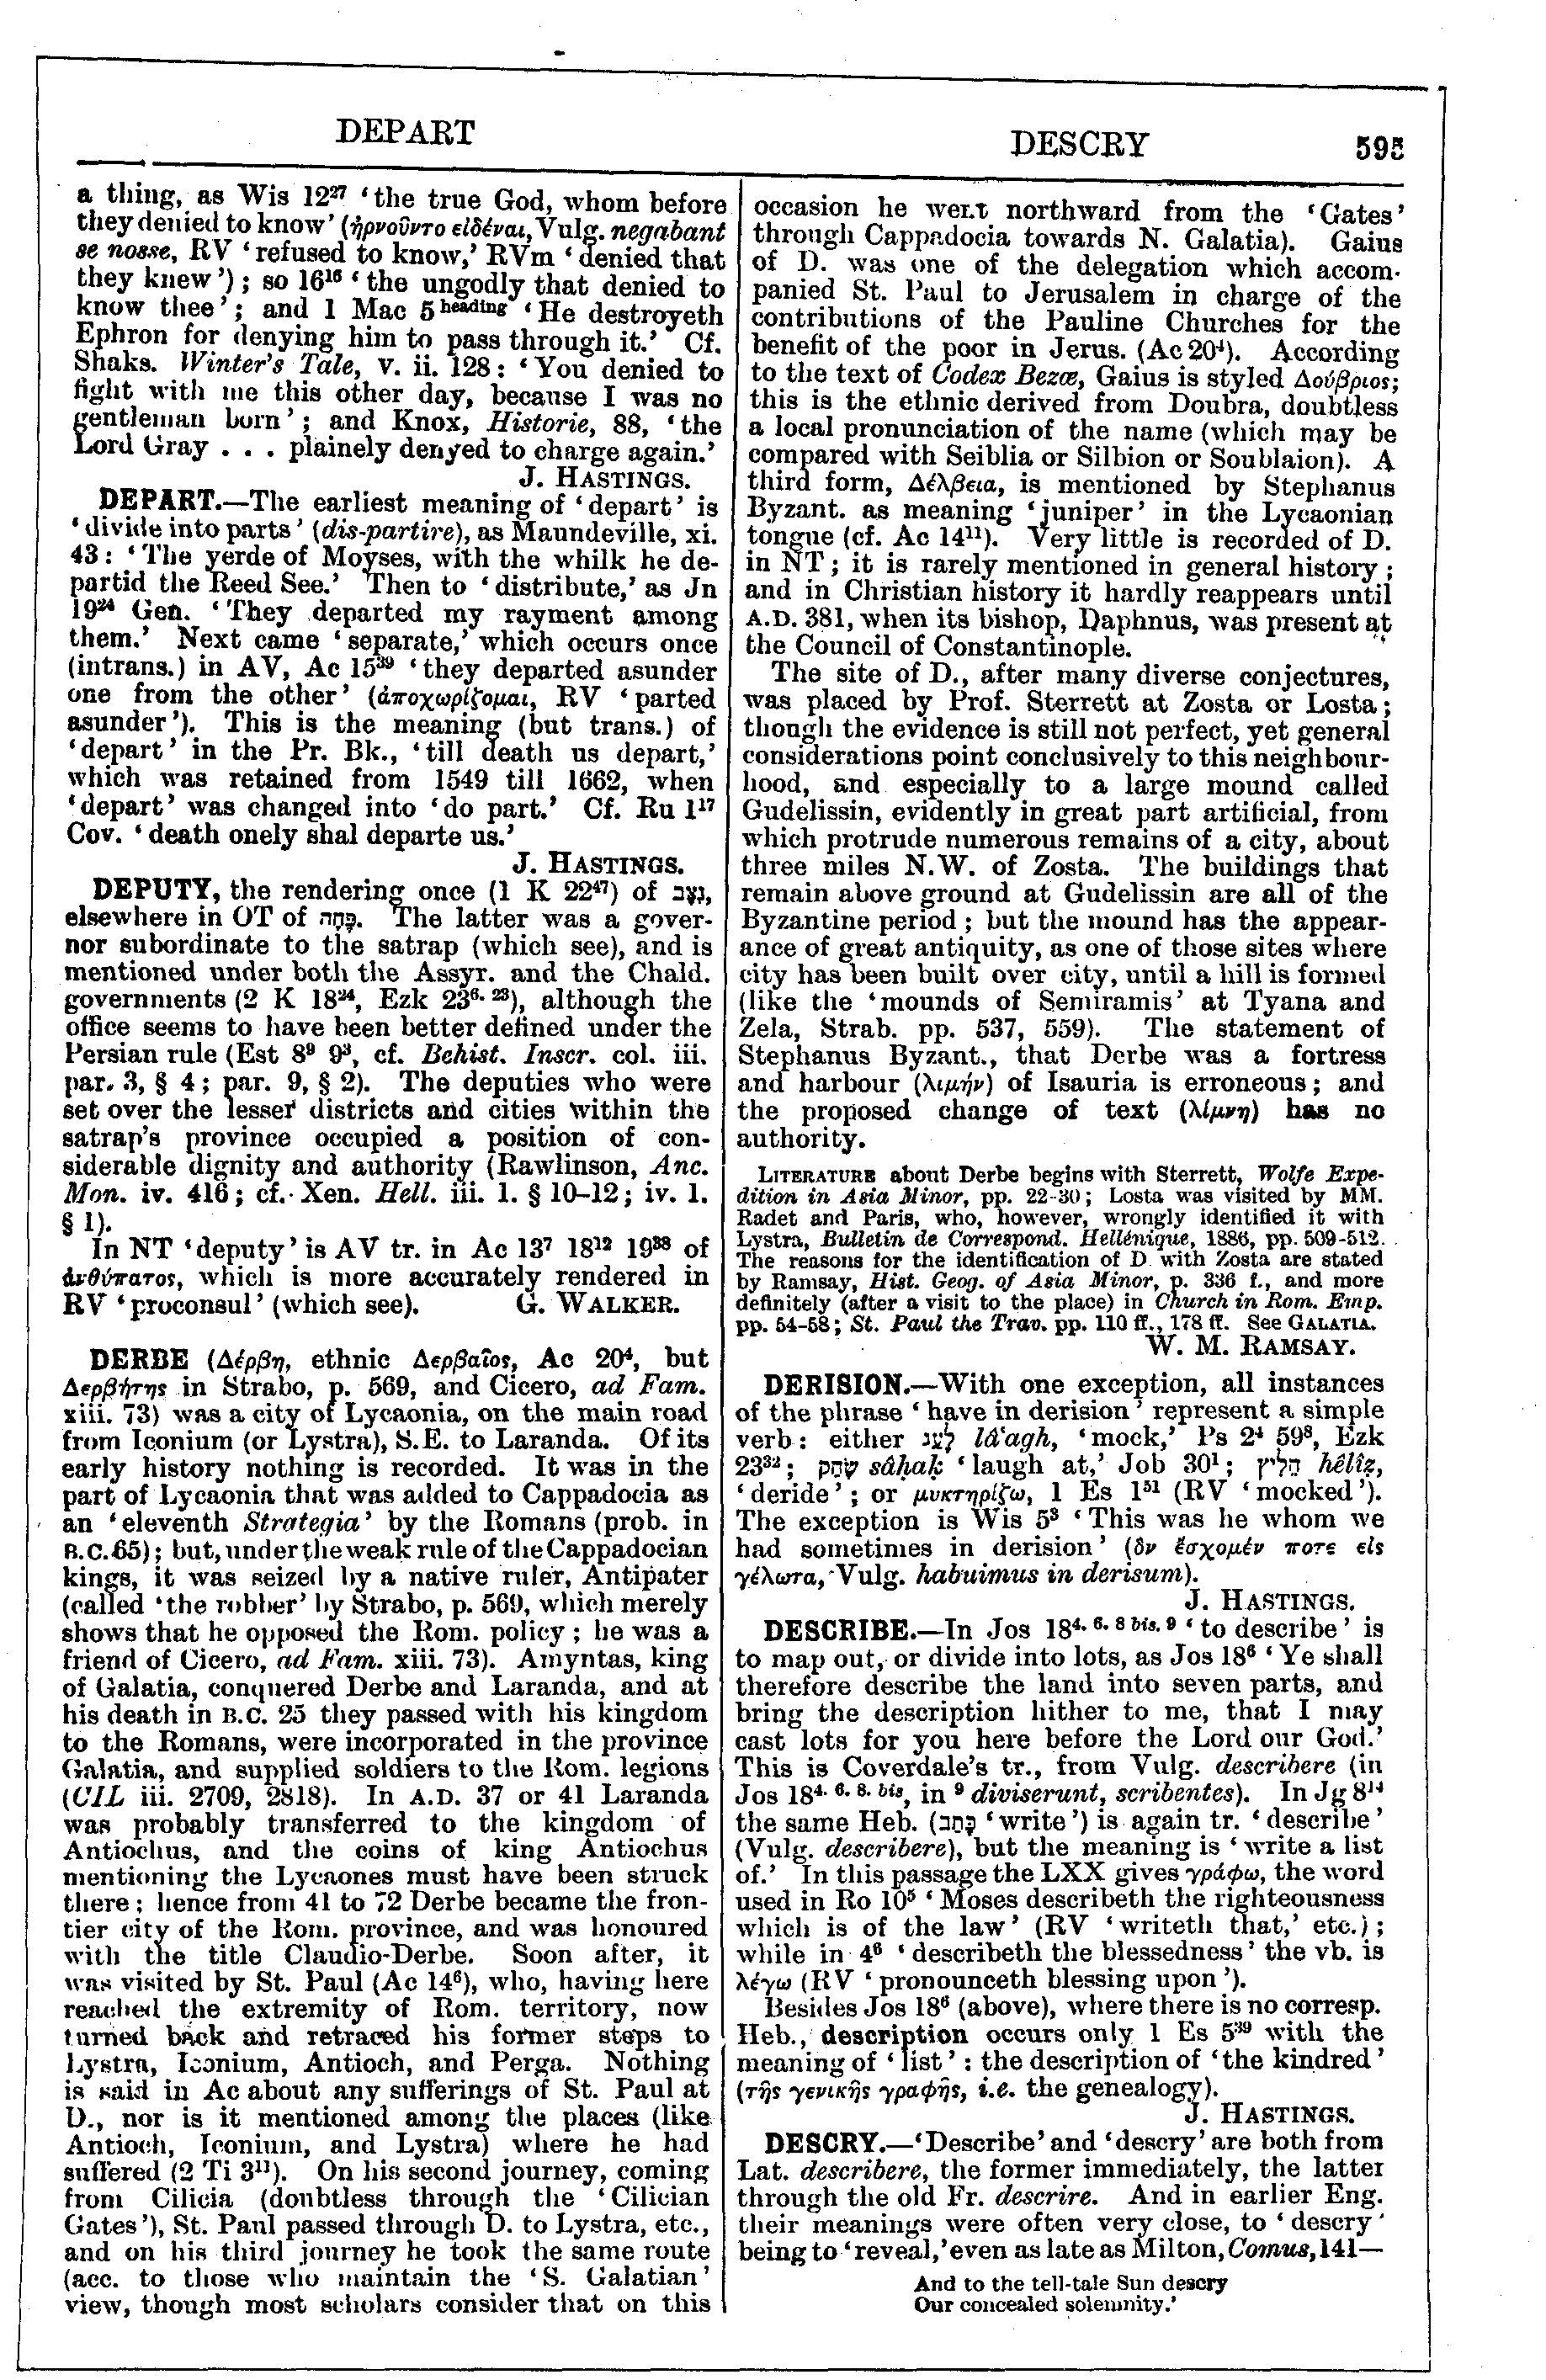 Image of page 595